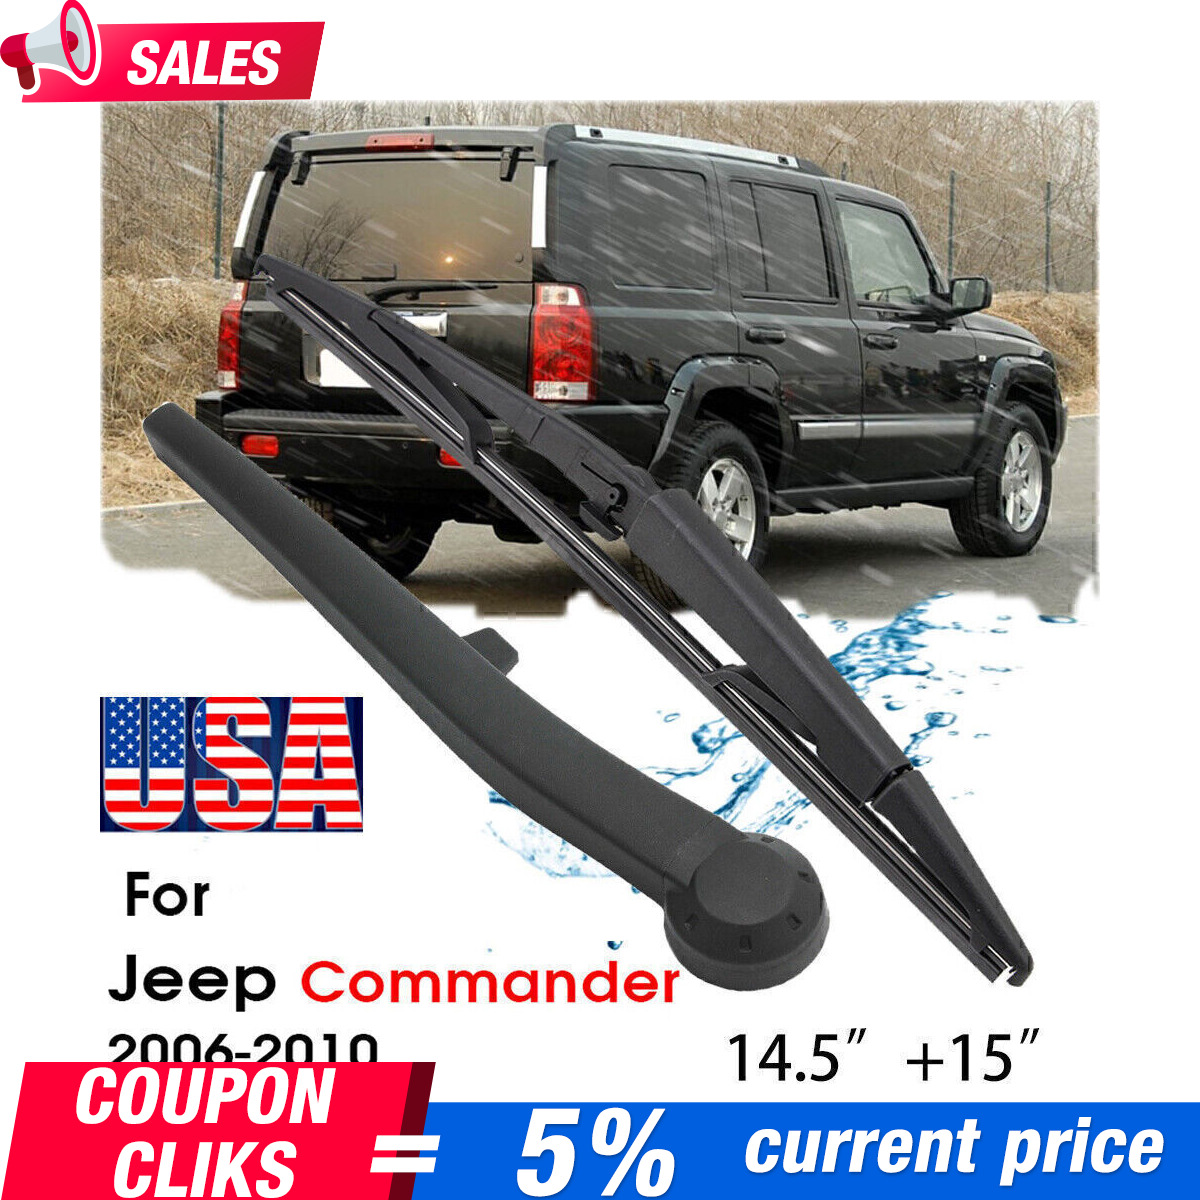 New Rear Windshield Wiper Arm & Blade For Jeep Commander 2006-2010 ∫